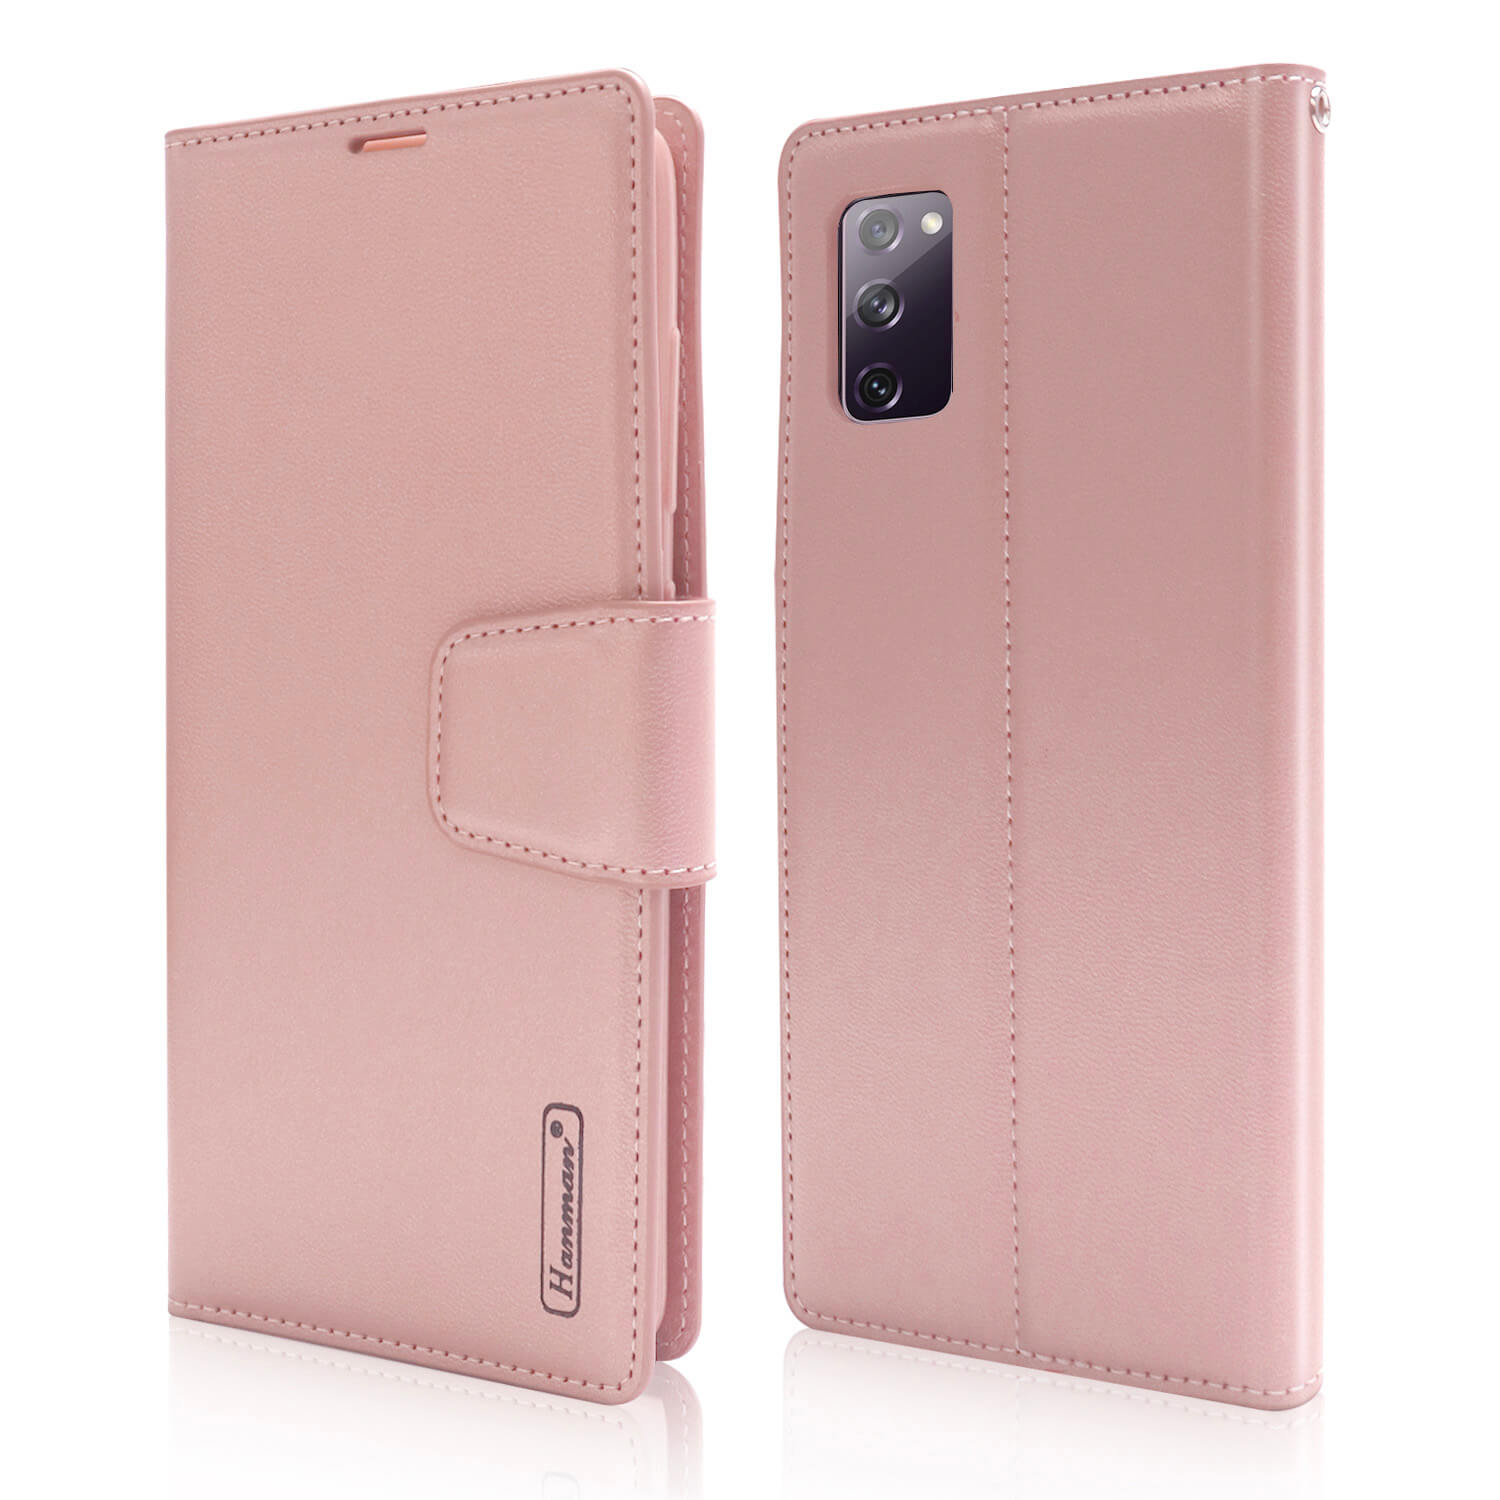 Hanman Galaxy S20 FE 5G Leather Wallet Case for Samsung - Rose Gold